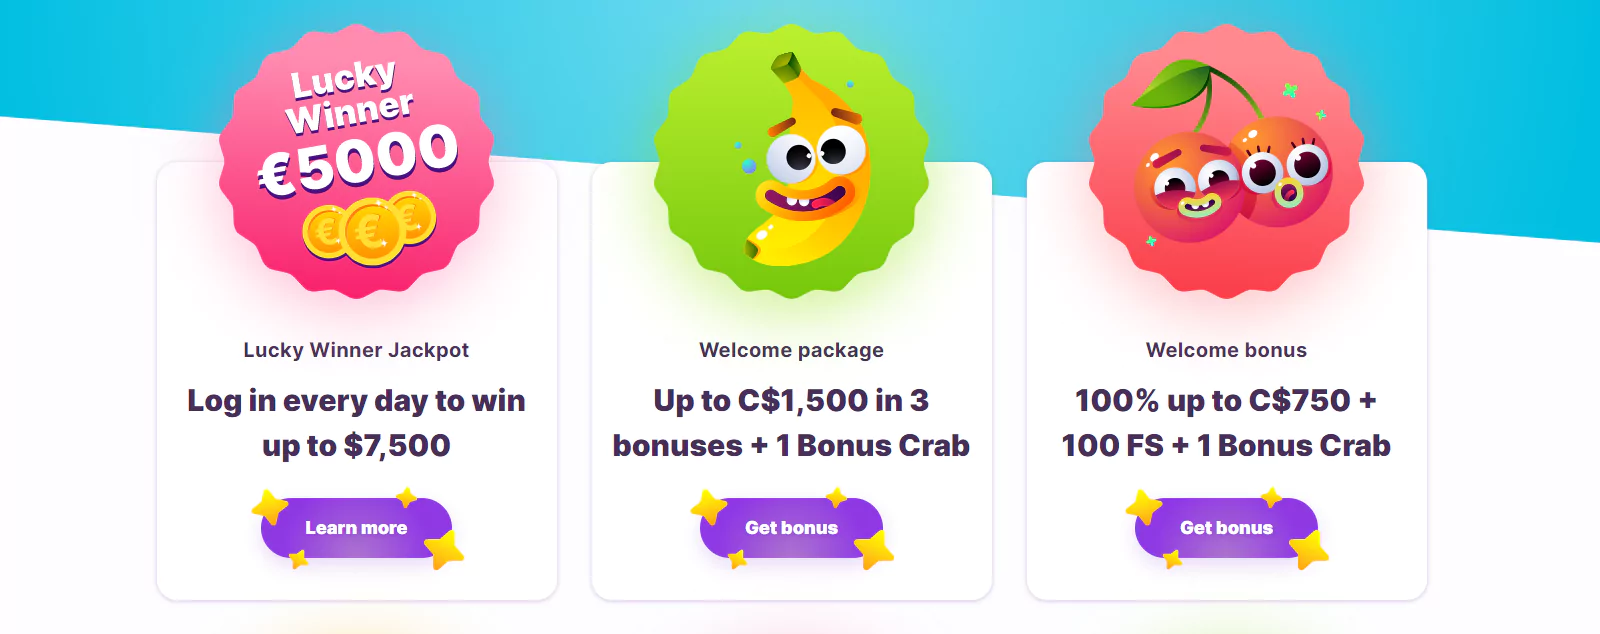 Screenshot of Best Payout Casino Promotion from Official Website